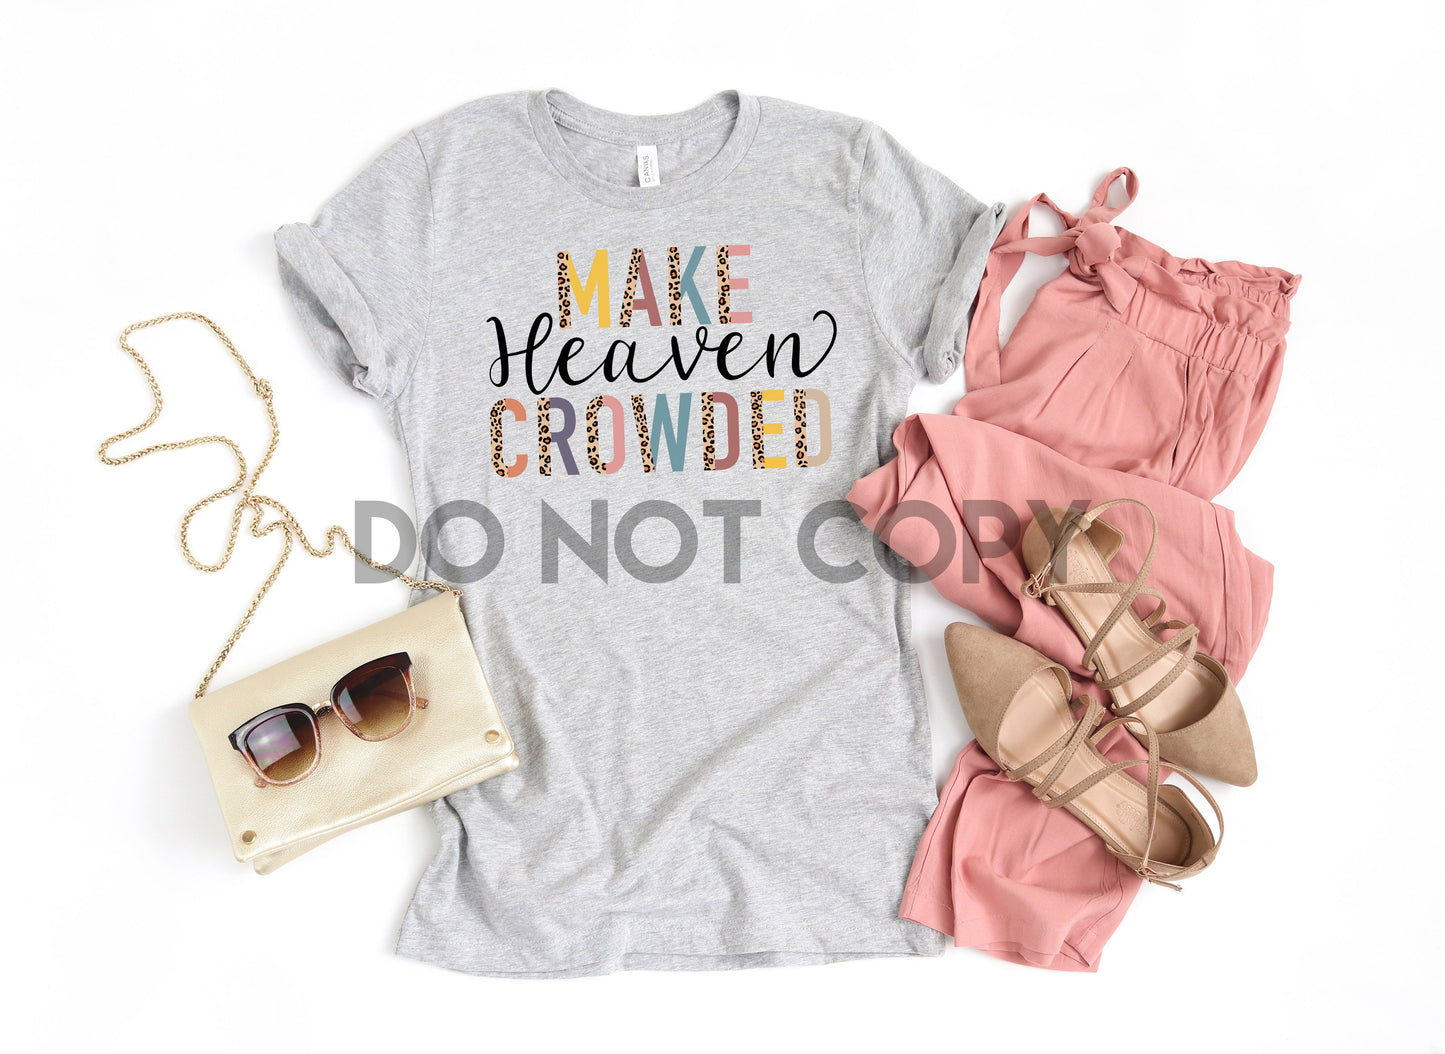 Make Heaven Crowded Dream Print or Sublimation Print